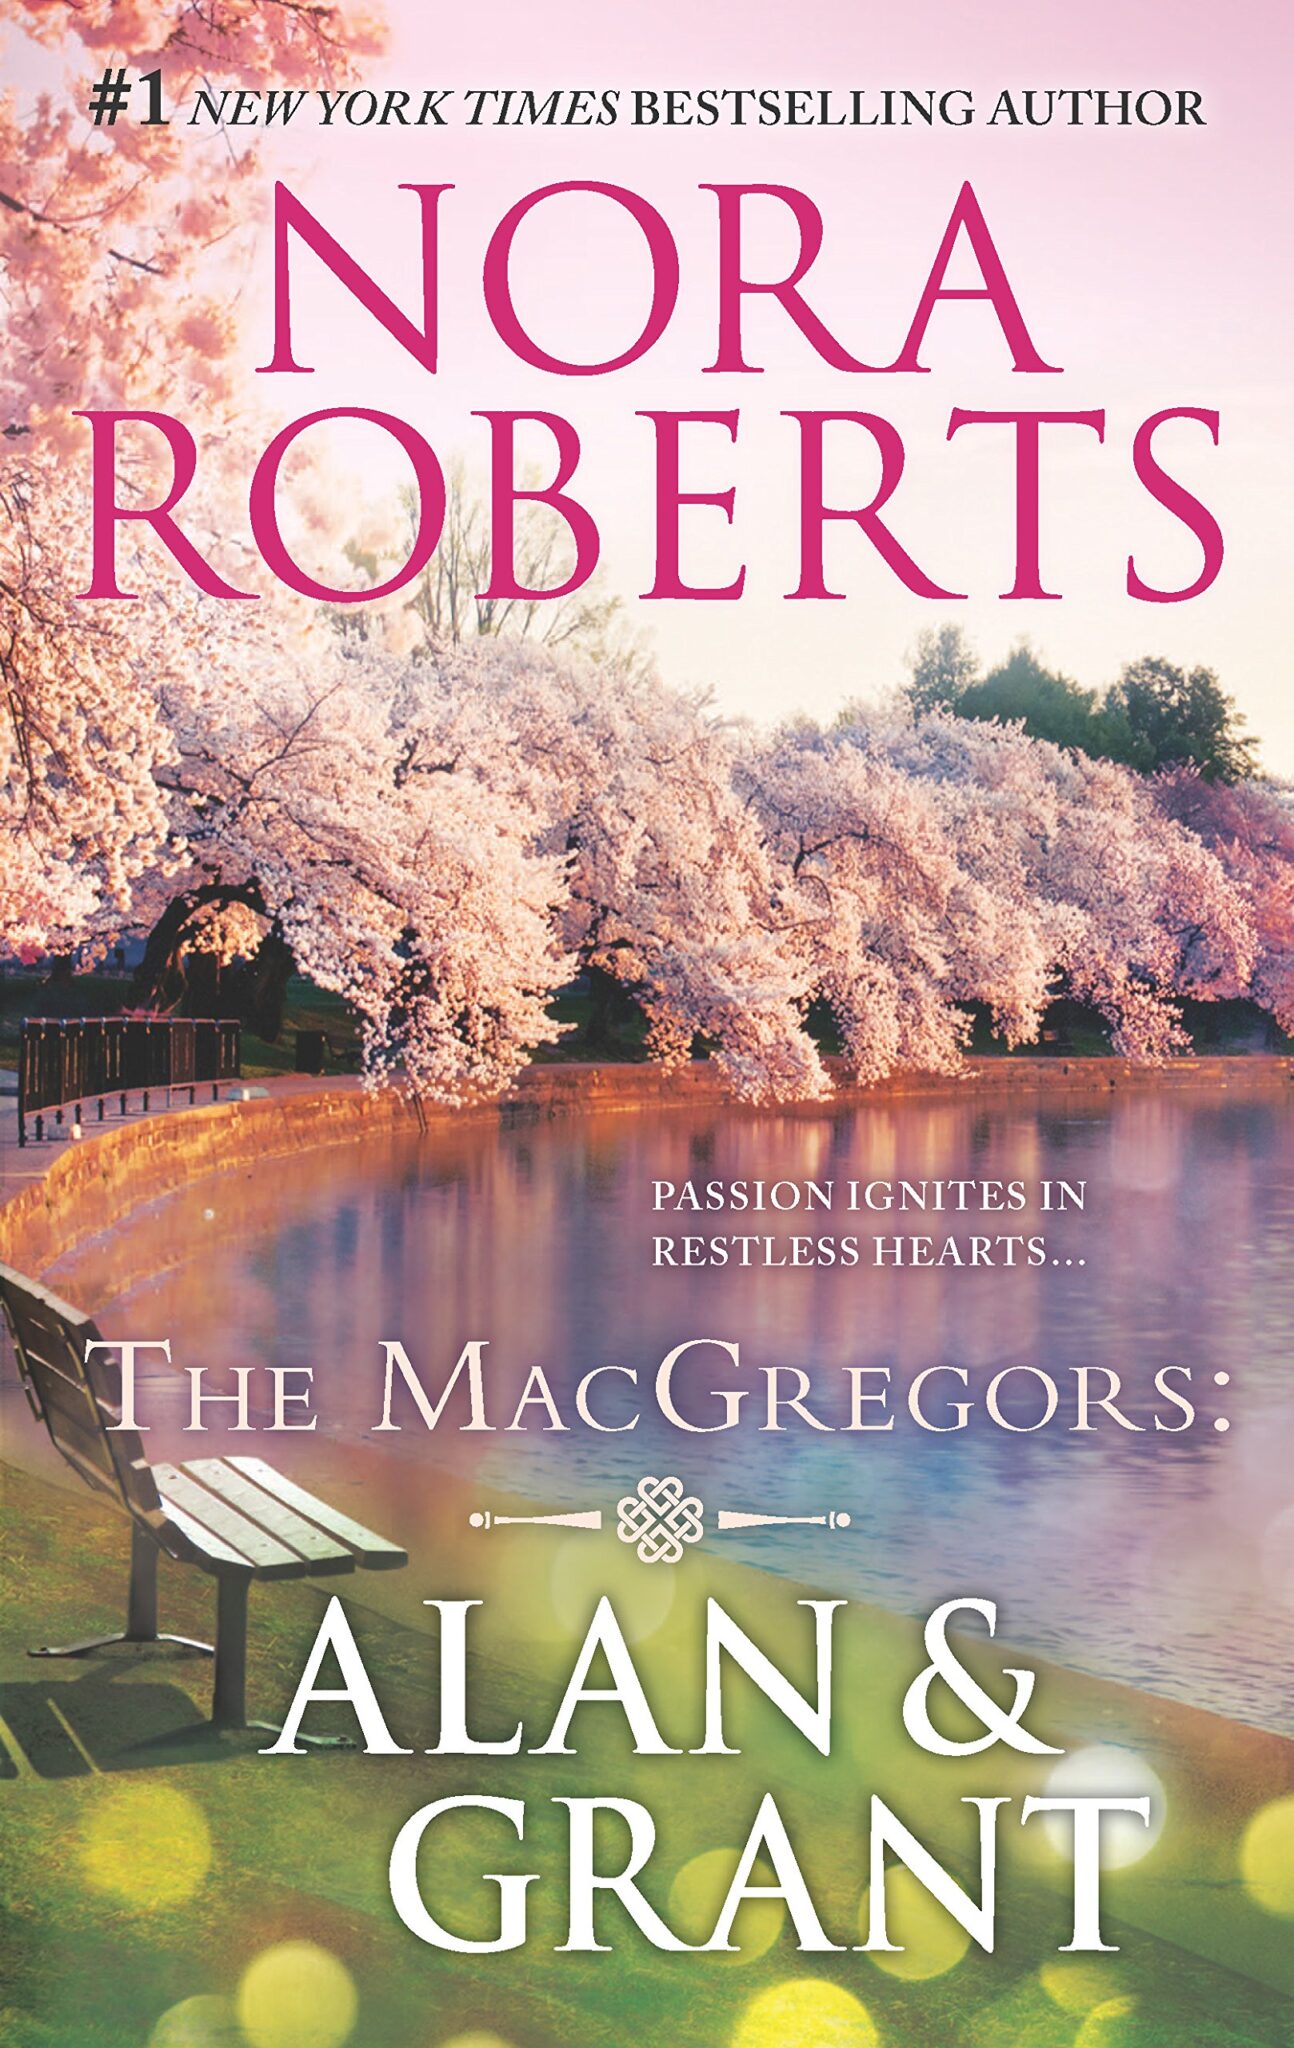 The Full List of Nora Roberts books